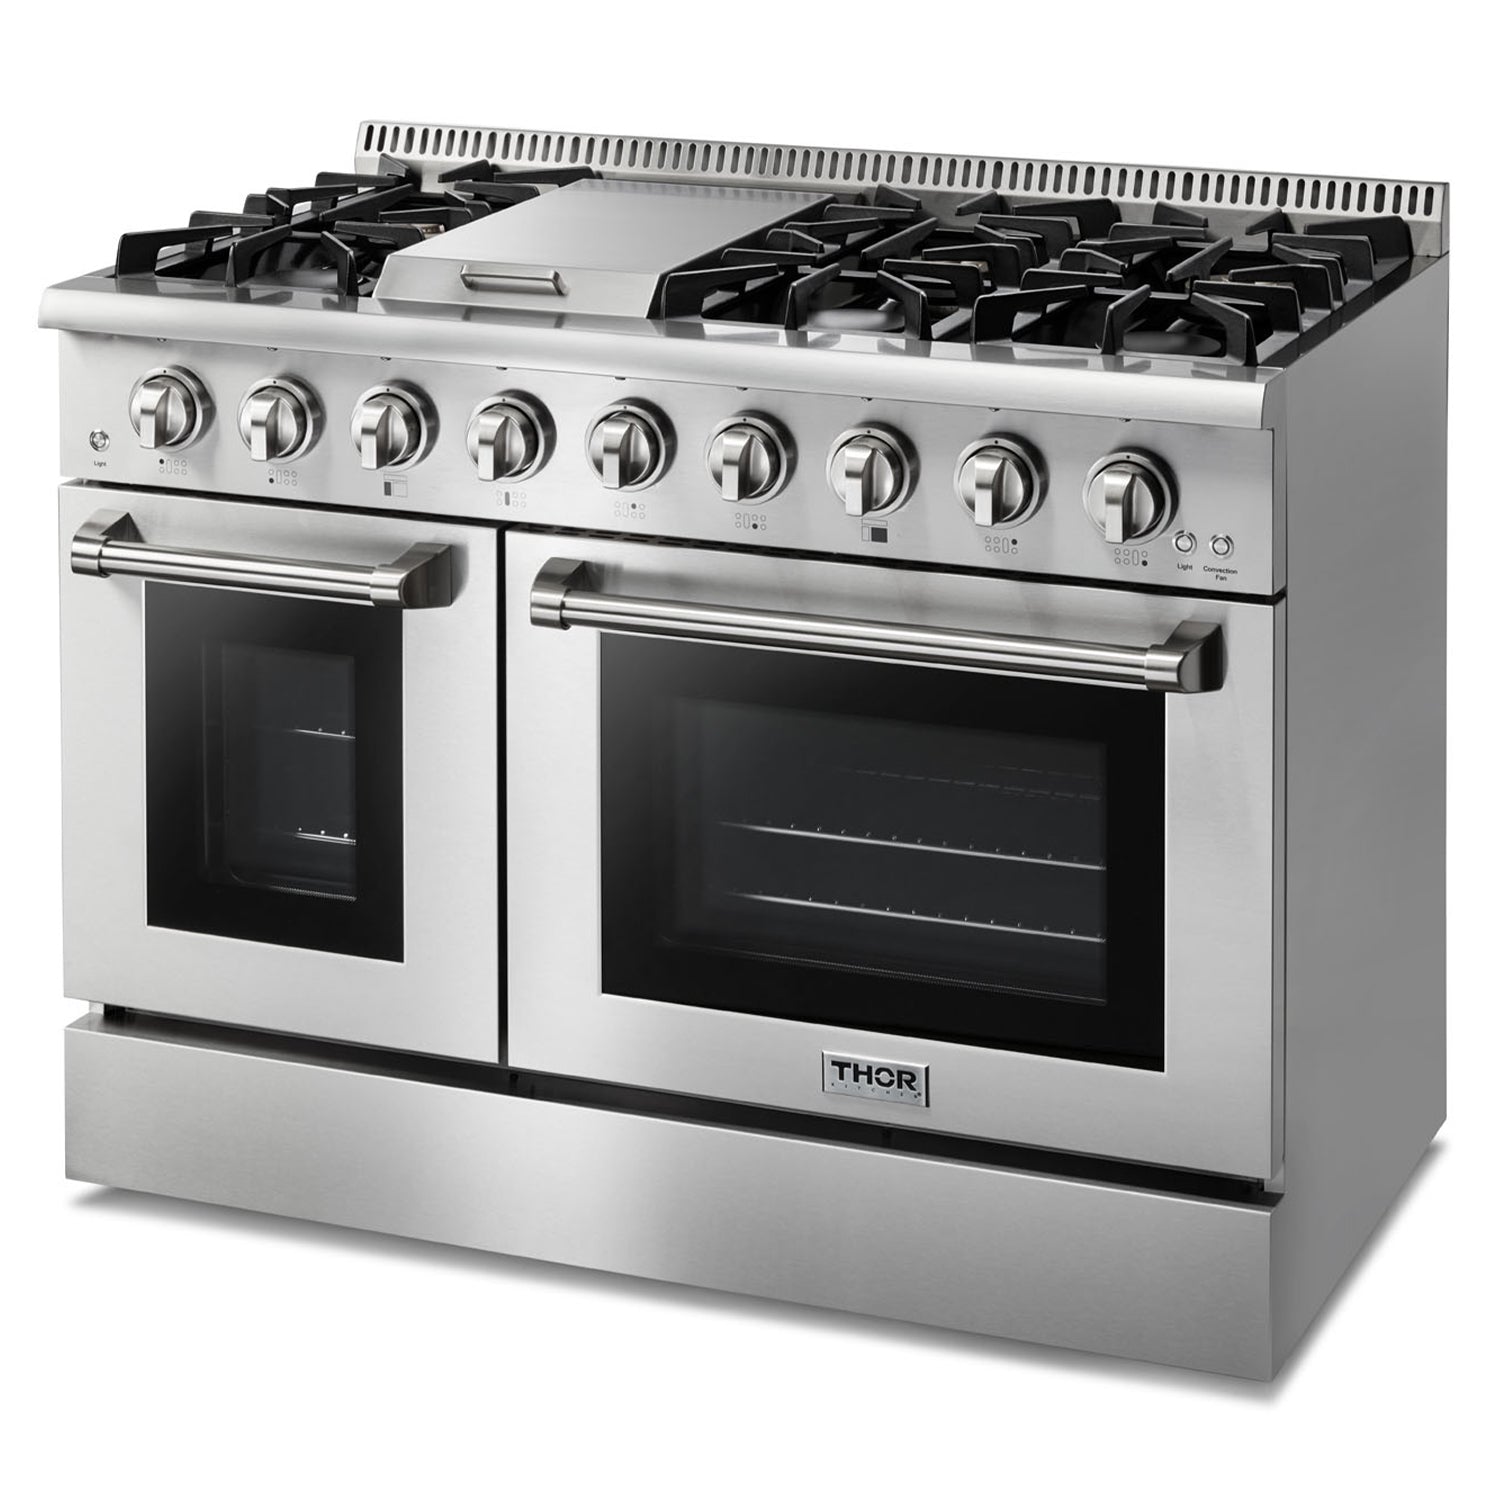 Thor Kitchen 2-Piece Pro Appliance Package - 48-Inch Gas Range & Under Cabinet 16.5-Inch Tall Hood in Stainless Steel